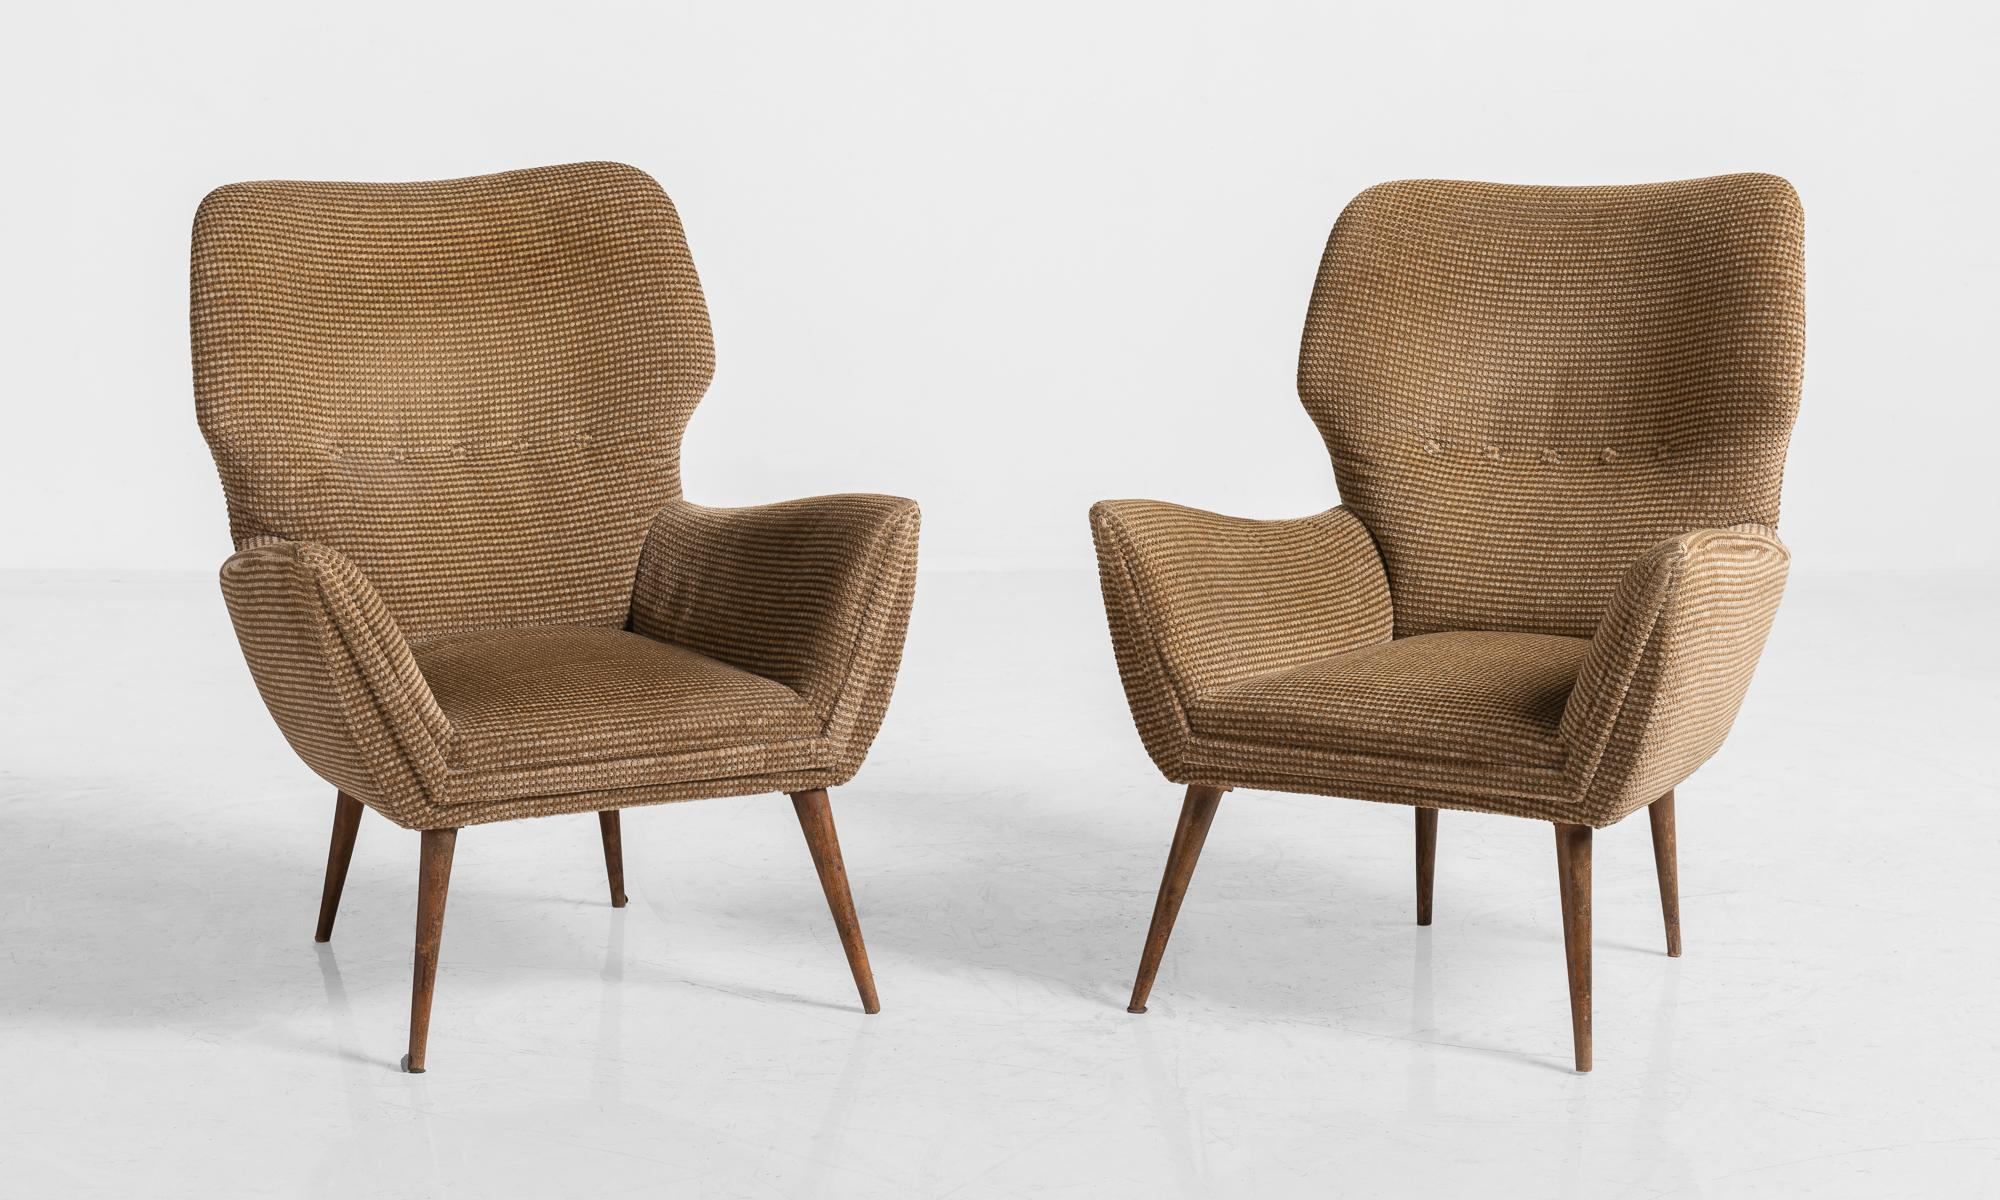 Modern armchairs, Italy, circa 1950

Elegant form with original contrasting two-tone upholstery.